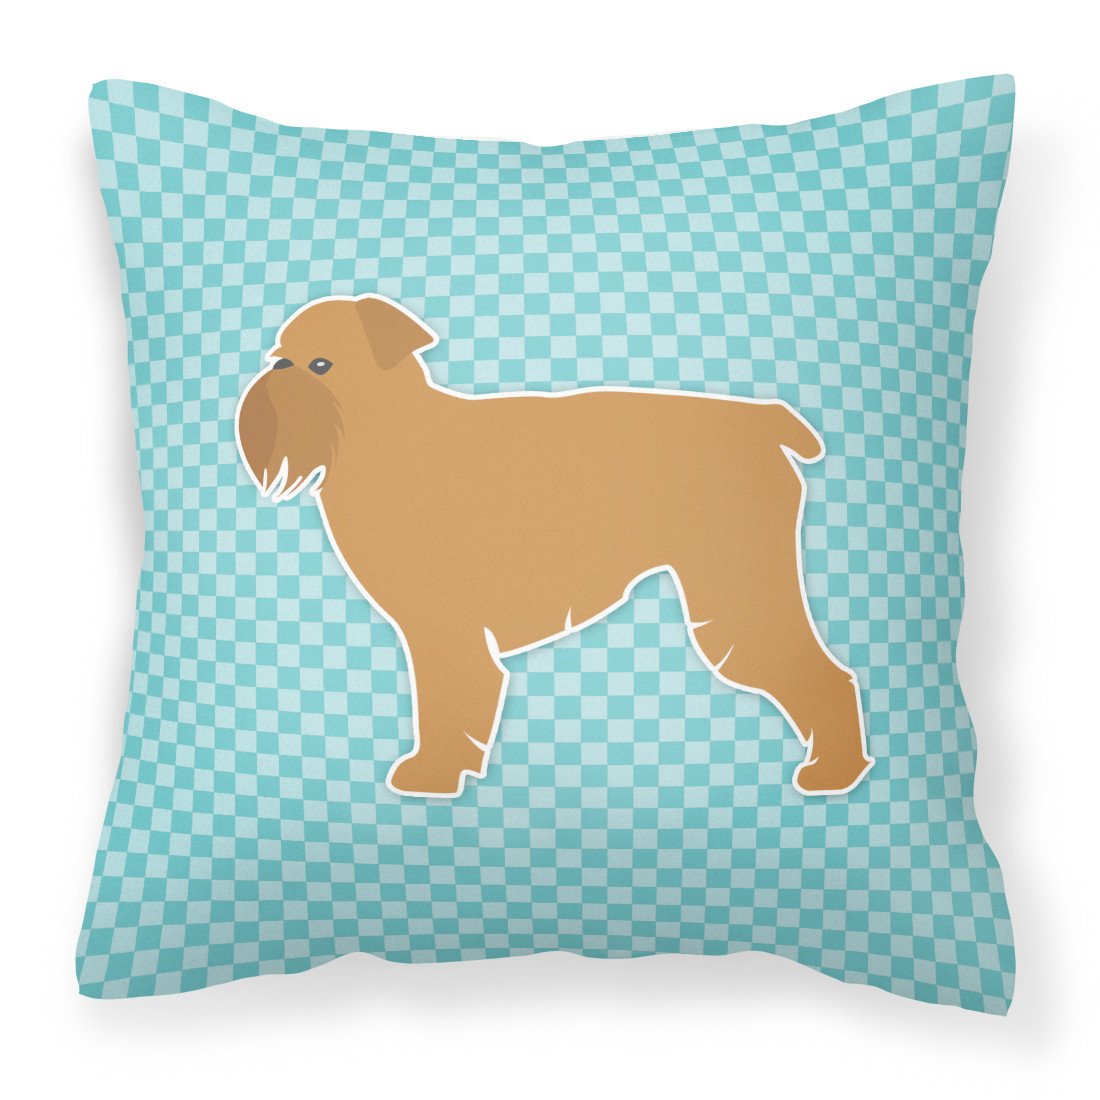 Brussels Griffon Checkerboard Blue Fabric Decorative Pillow BB3740PW1818 by Caroline's Treasures